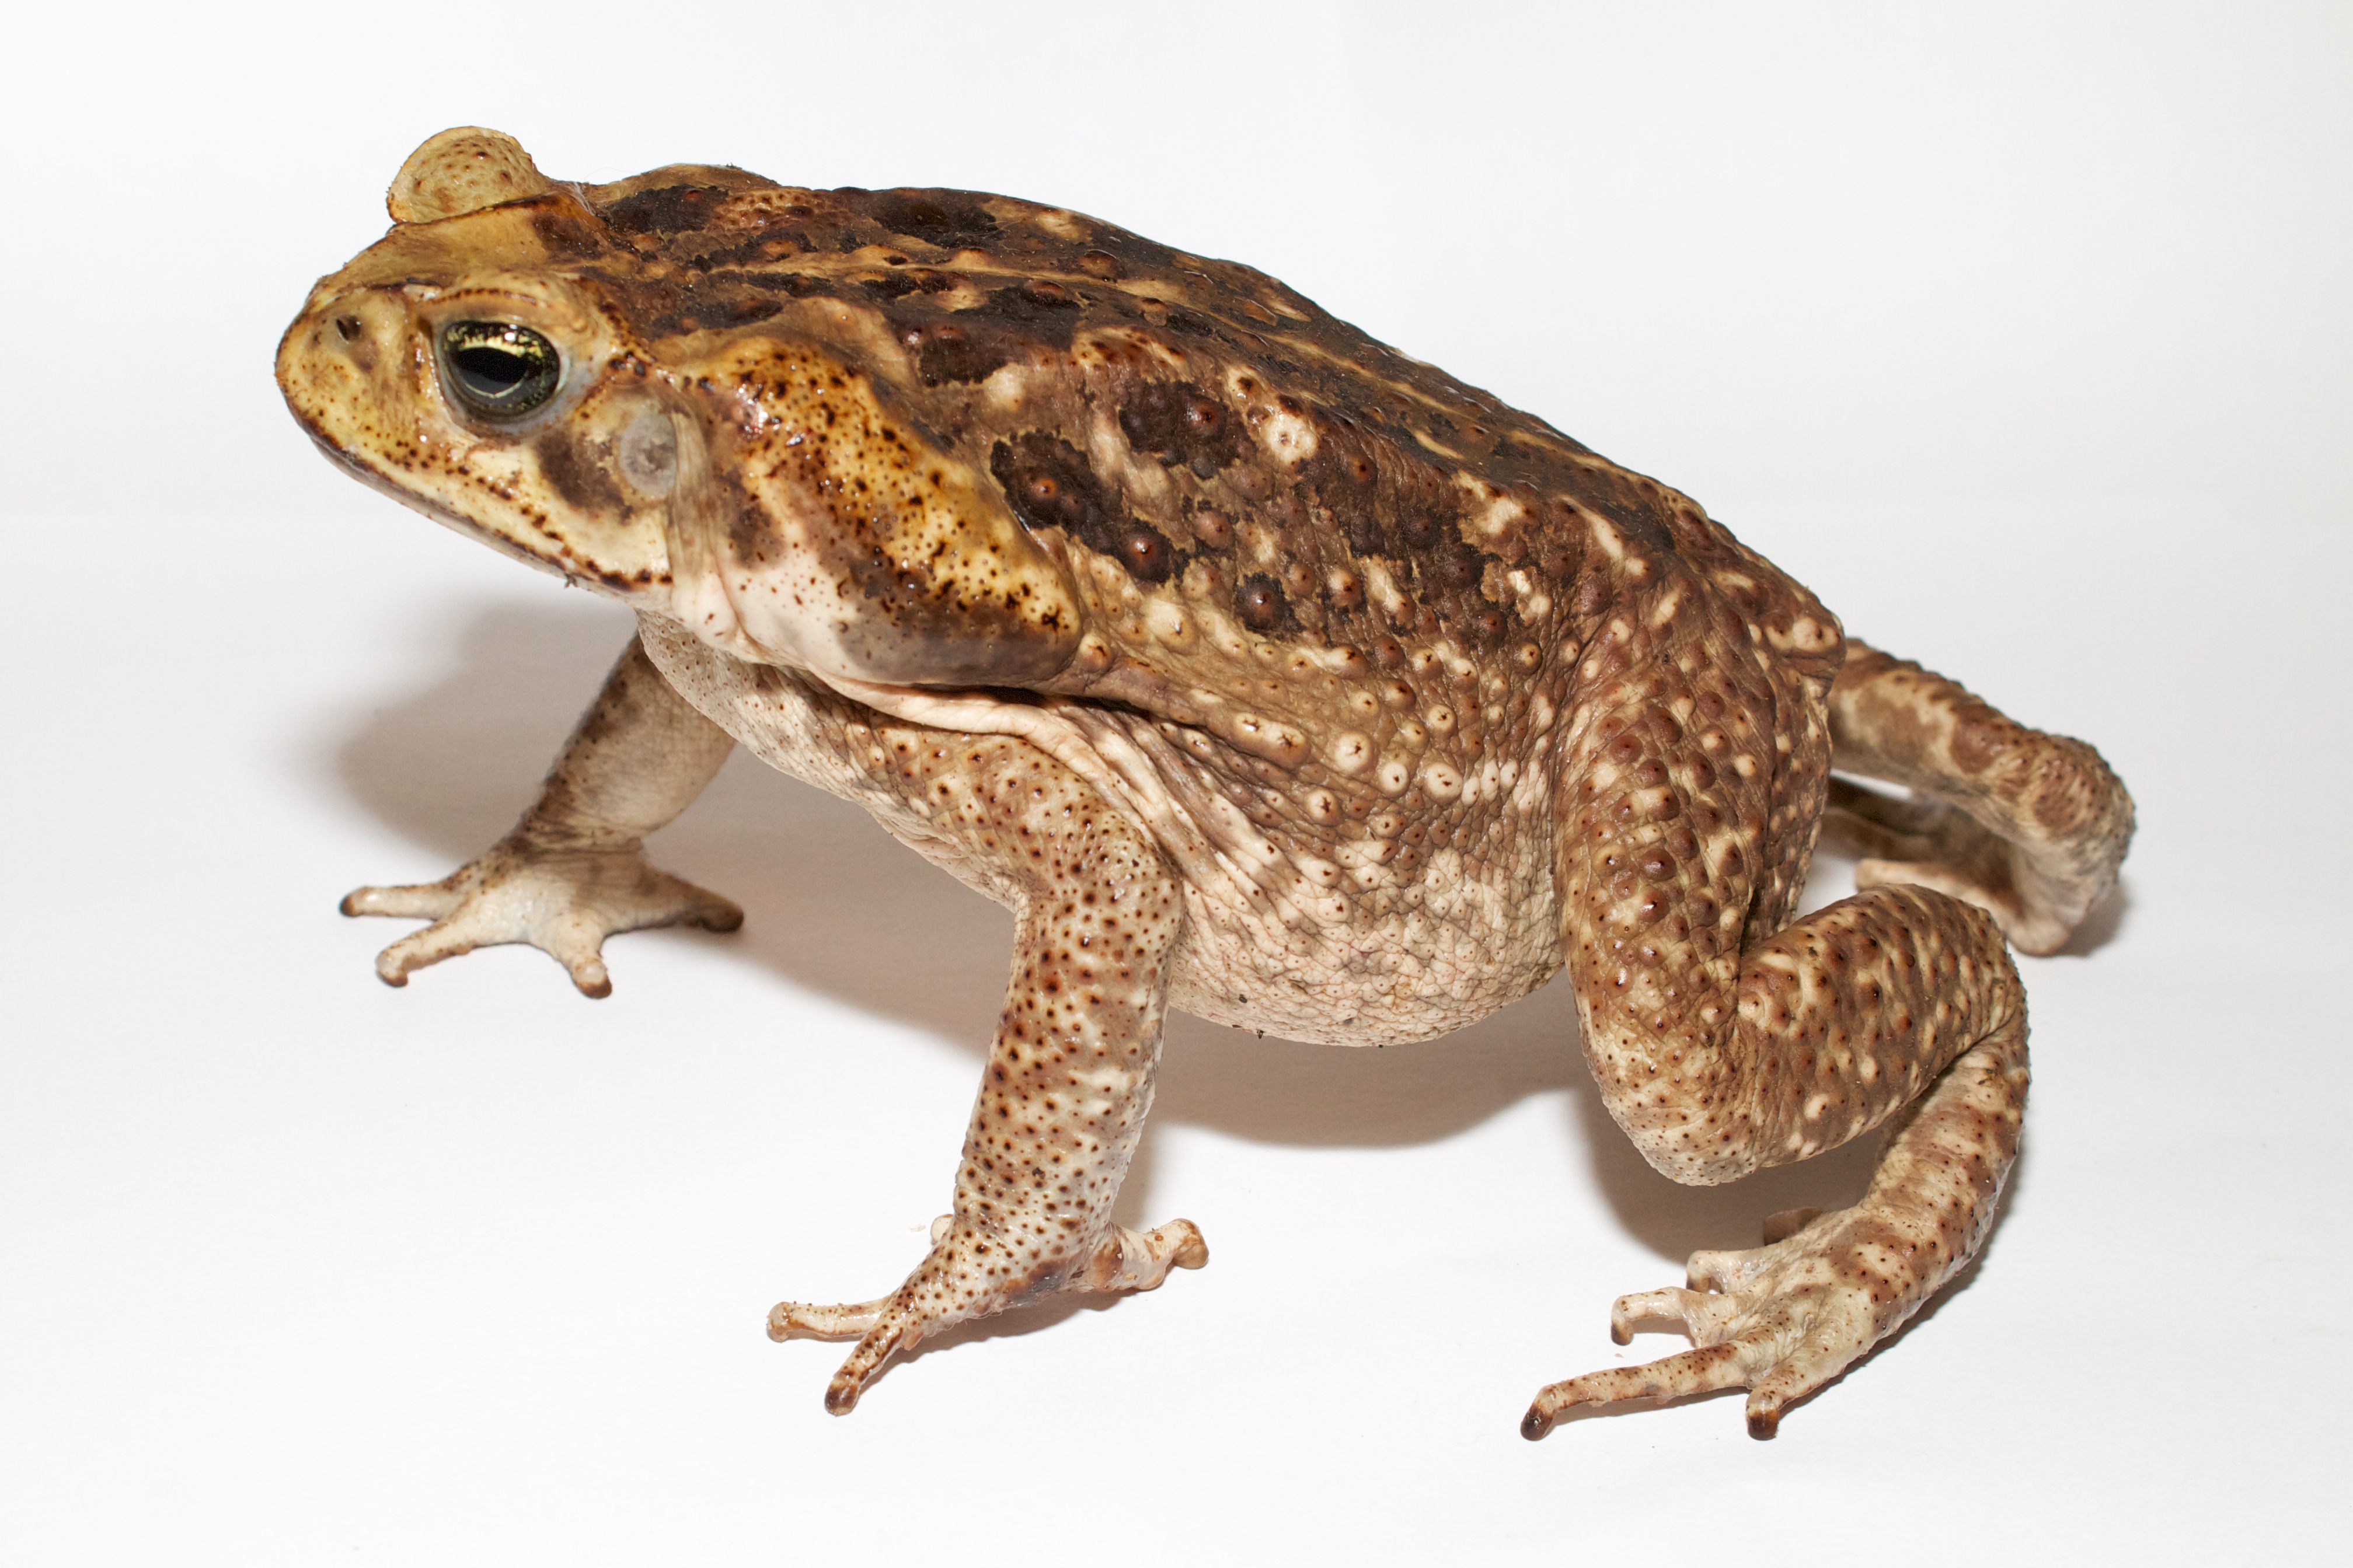 File:Adult Cane toad.jpg - Wikimedia Commons